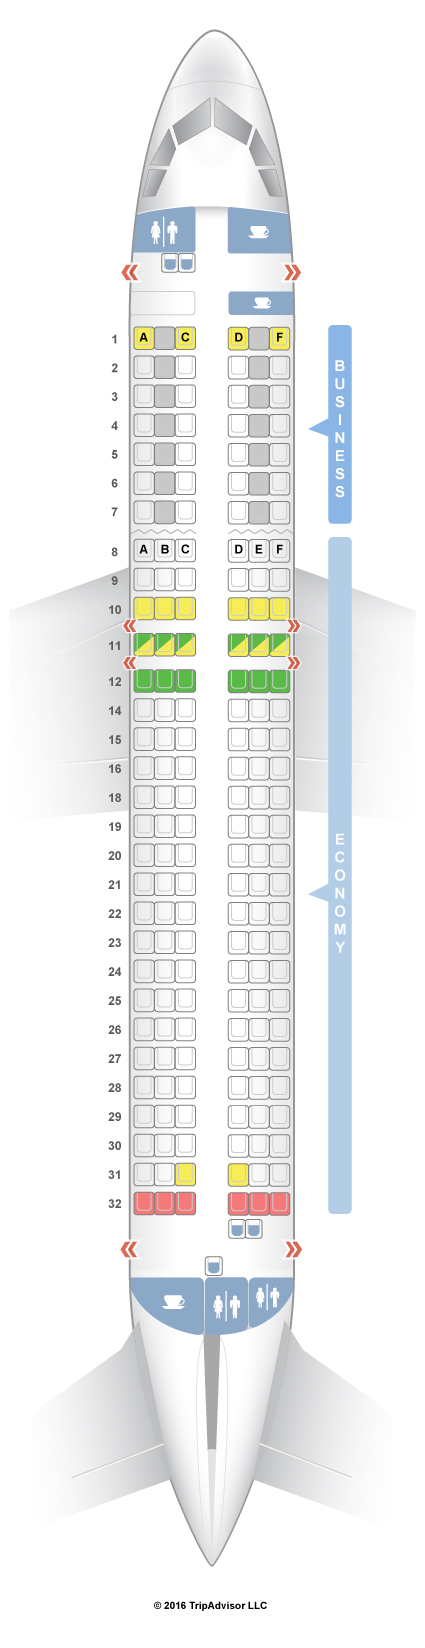 America Airbus A320 Seating Chart